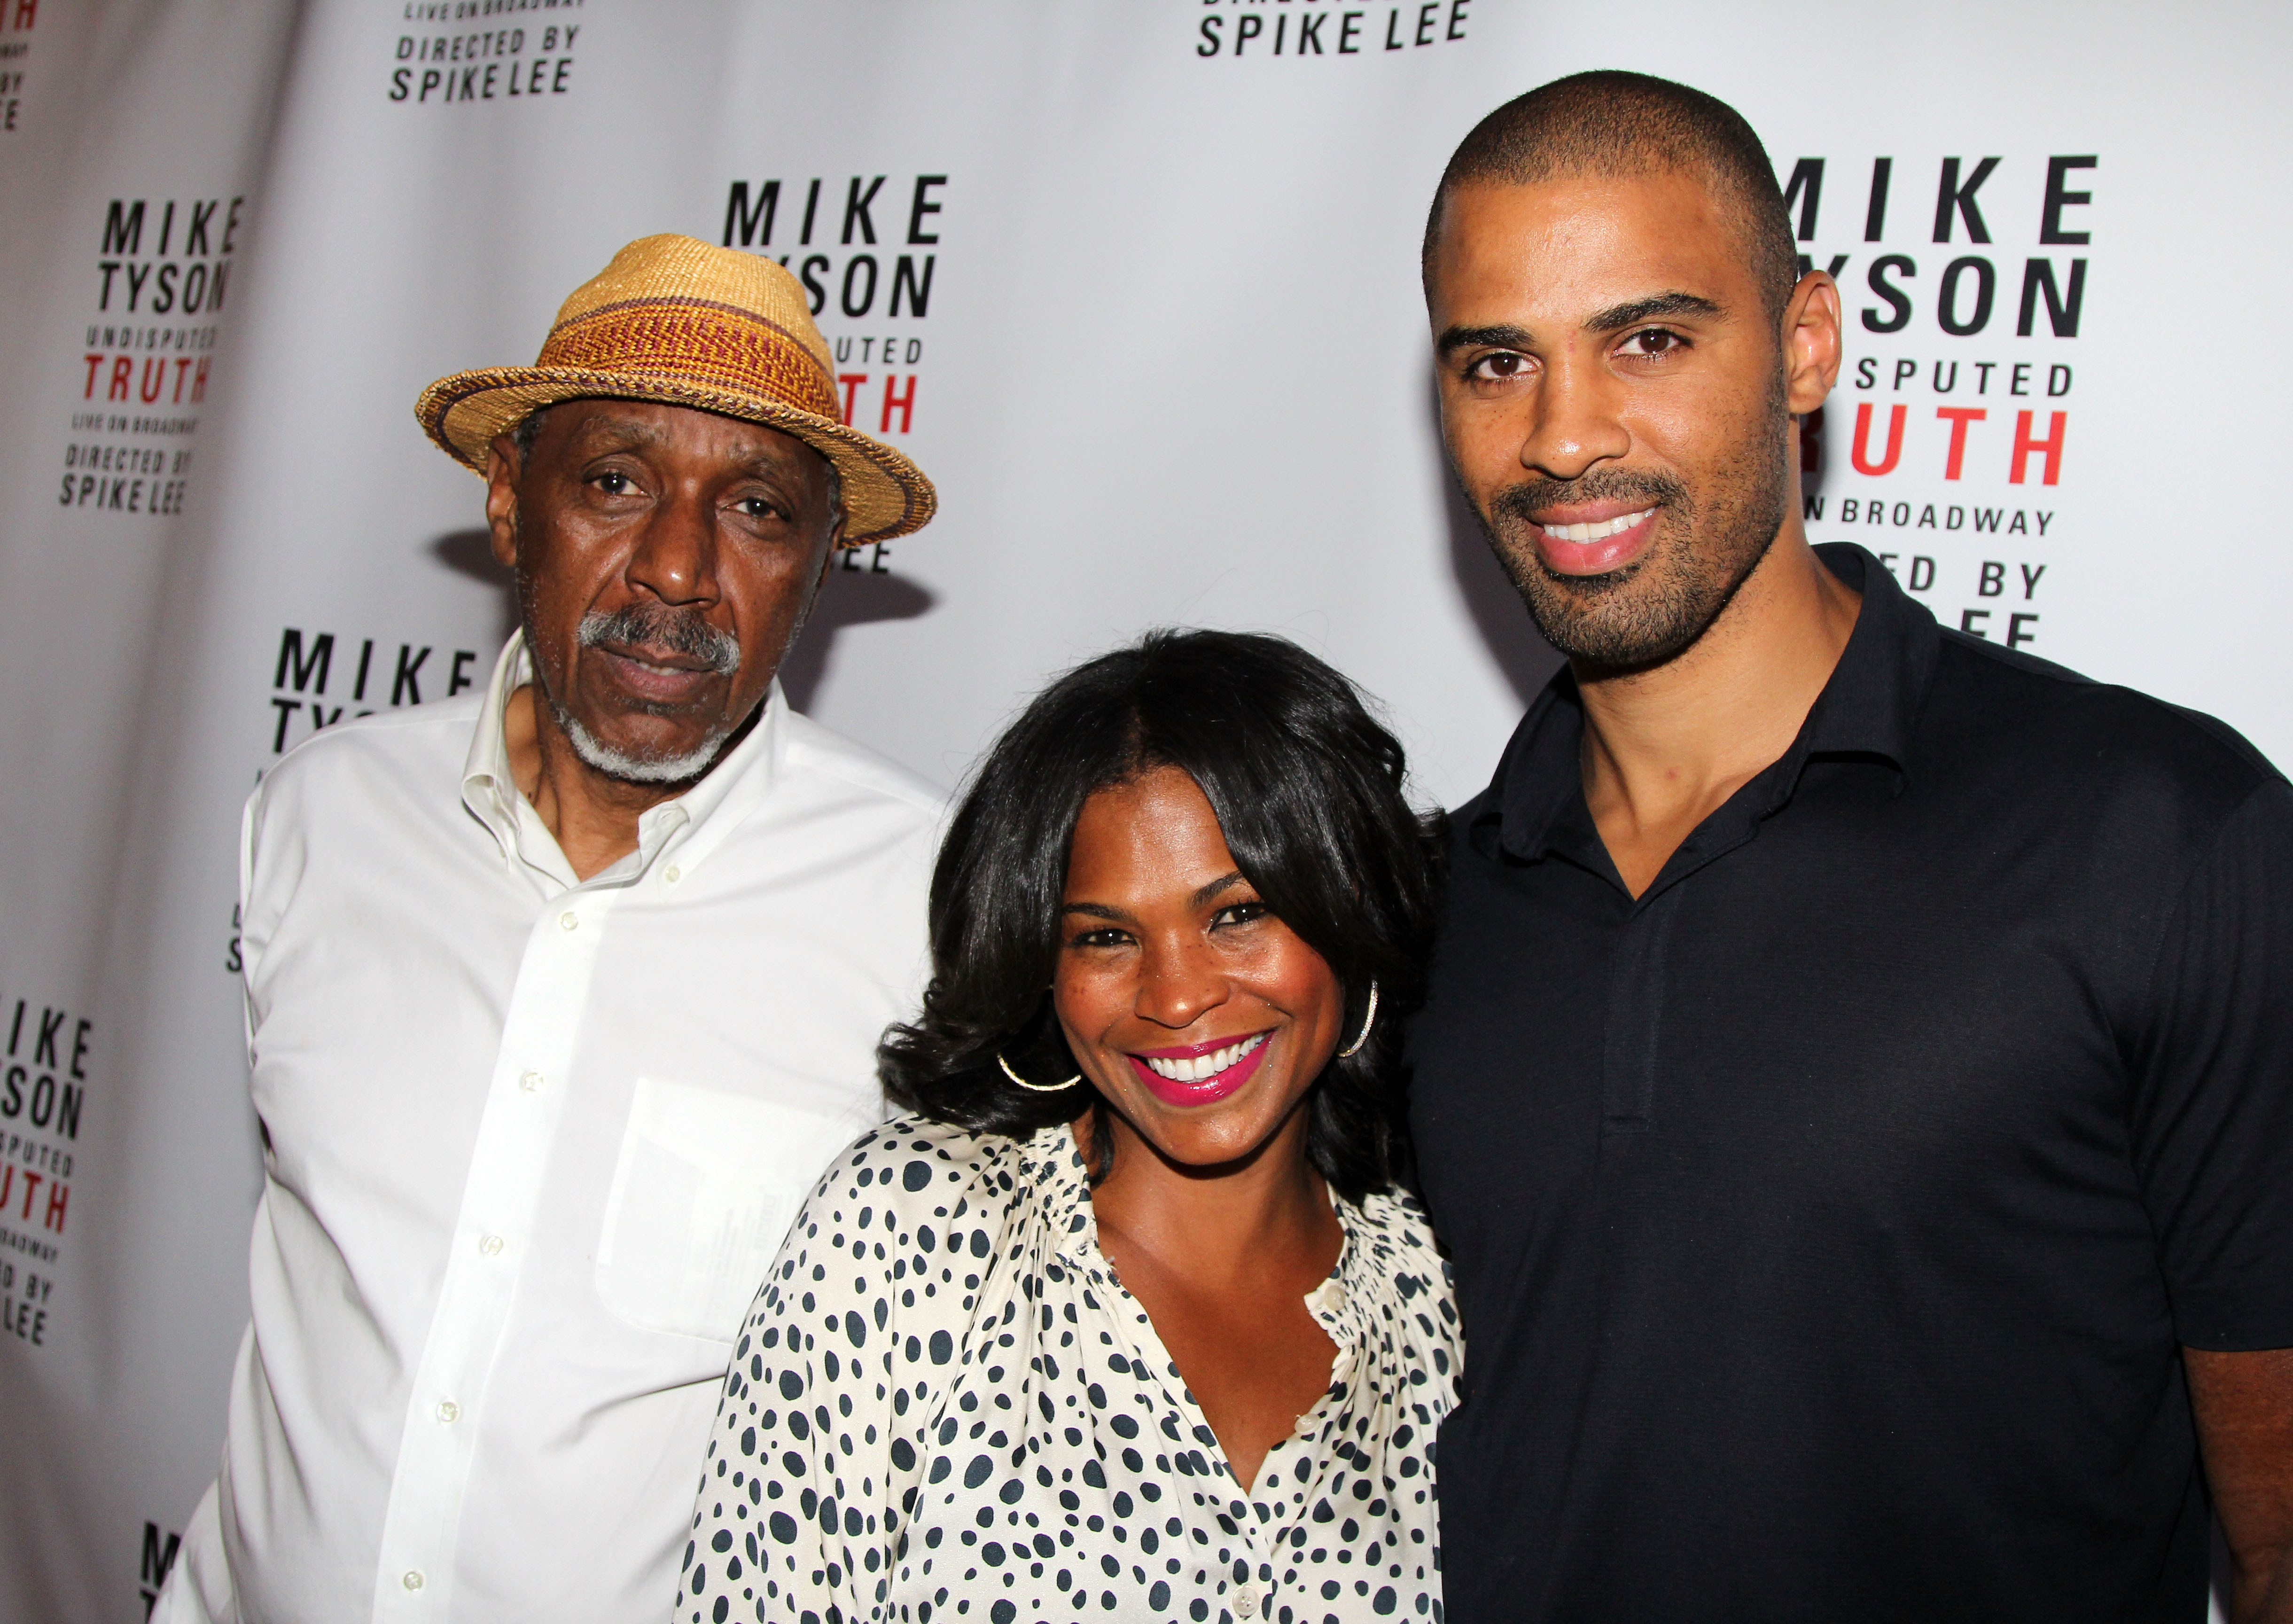 Doughtry "Doc" Long, Nia Long, and Ime Udoka at the Broadway opening night for "Mike Tyson: Undisputed Truth" on August 2, 2012, in New York City. | Source: Getty Images